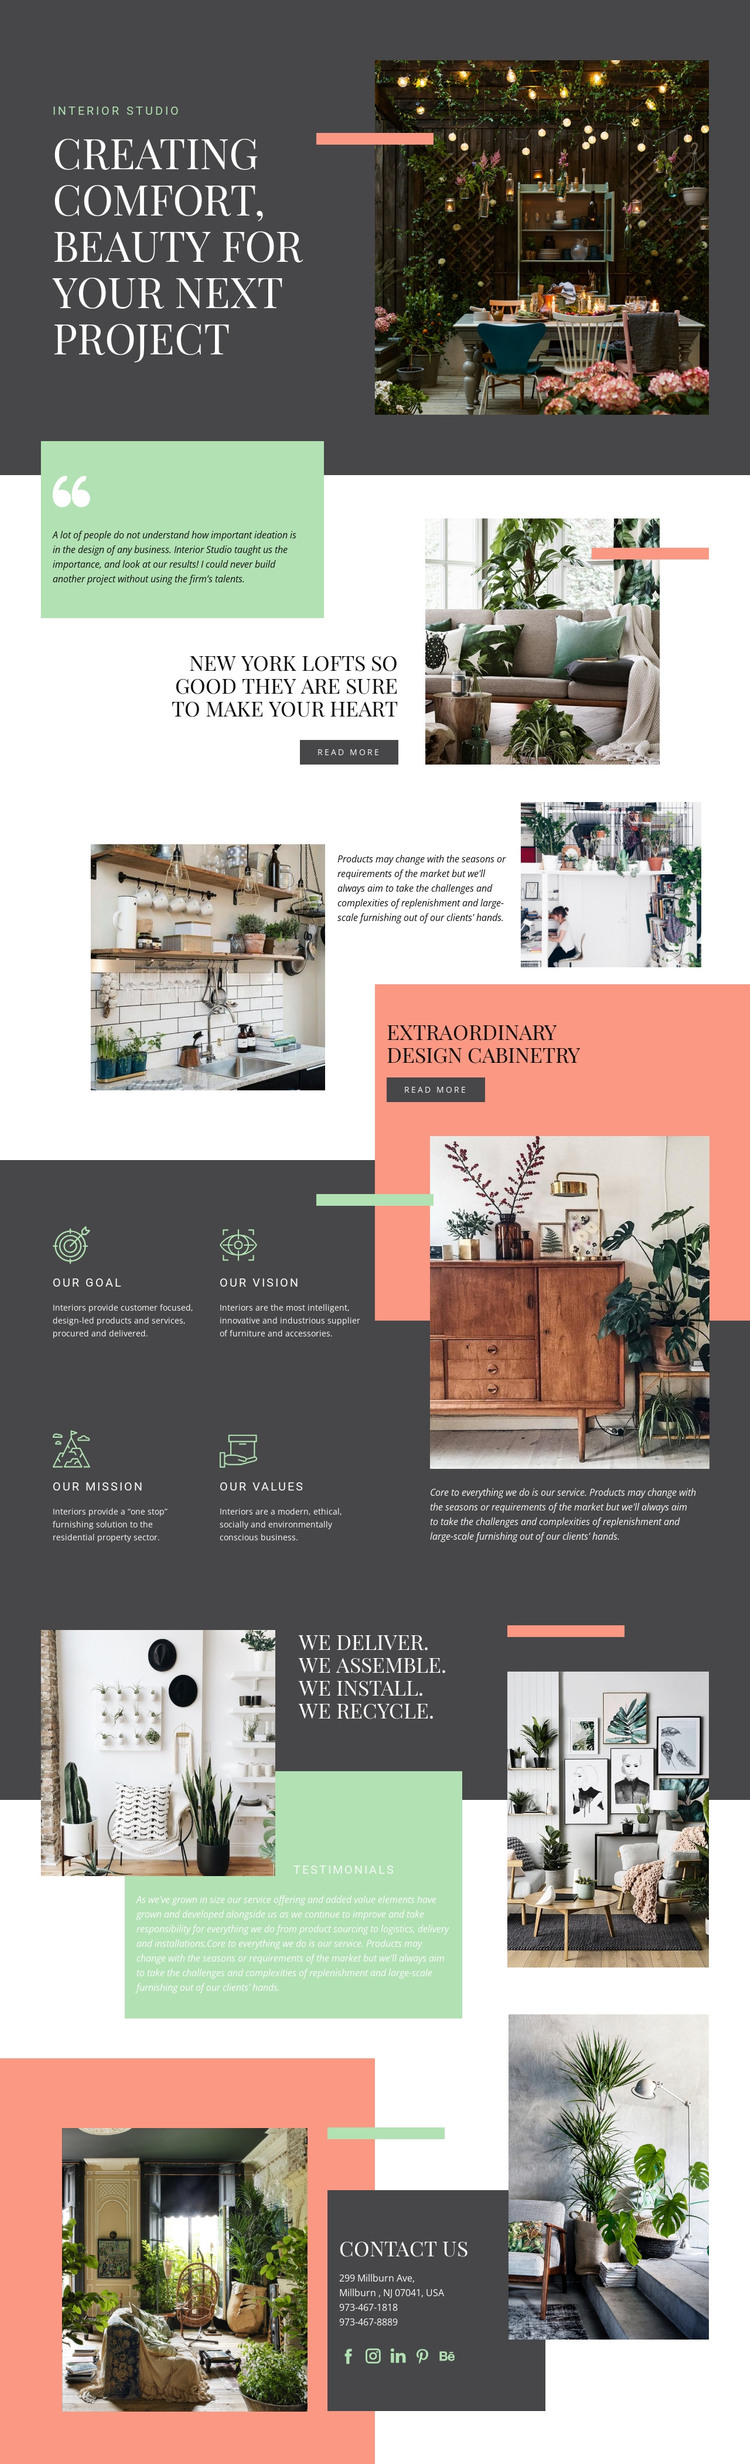 Comfort in your home HTML Template